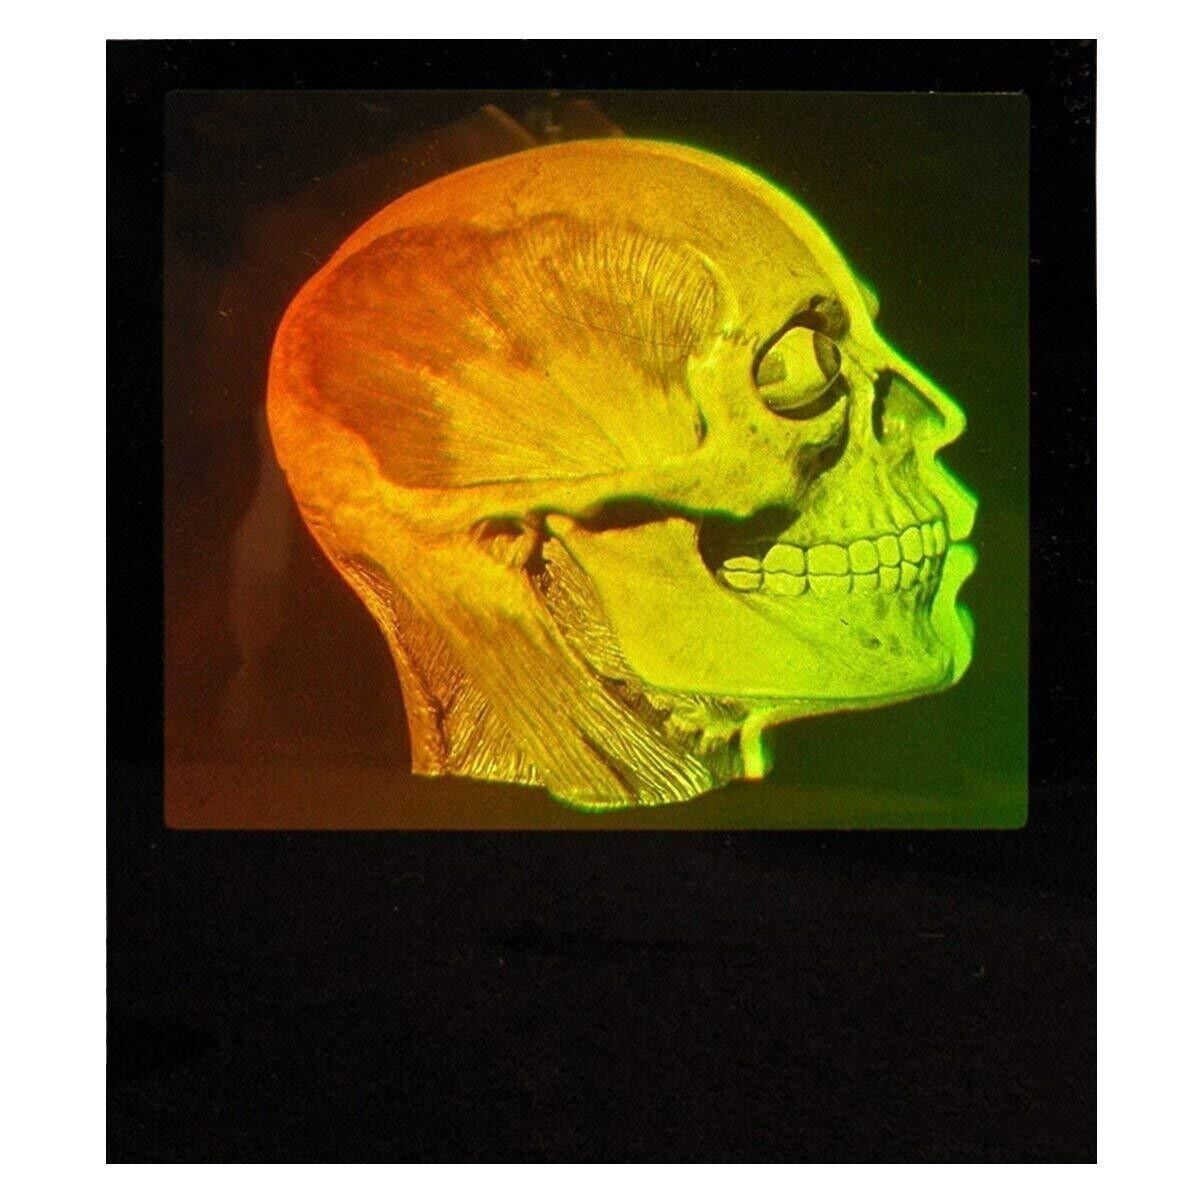 Brain/Skull 3D Photopoloymer Realistic 3D Hologram Picture - Small Desk Stand